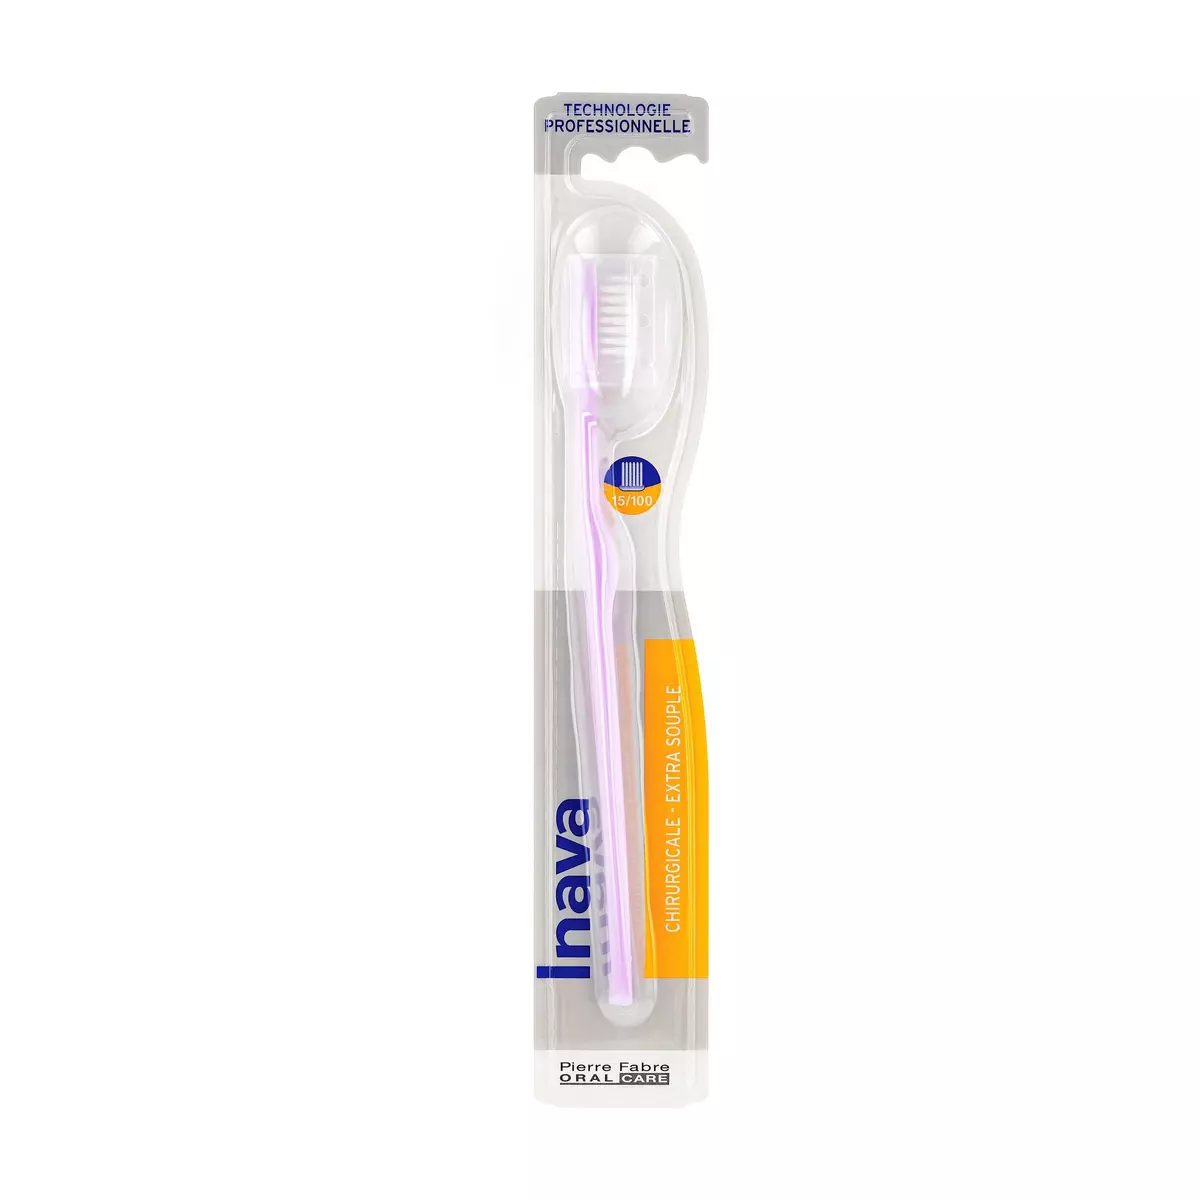 INAVA Brosse à dents chirurgicale extra souple 1 brosse